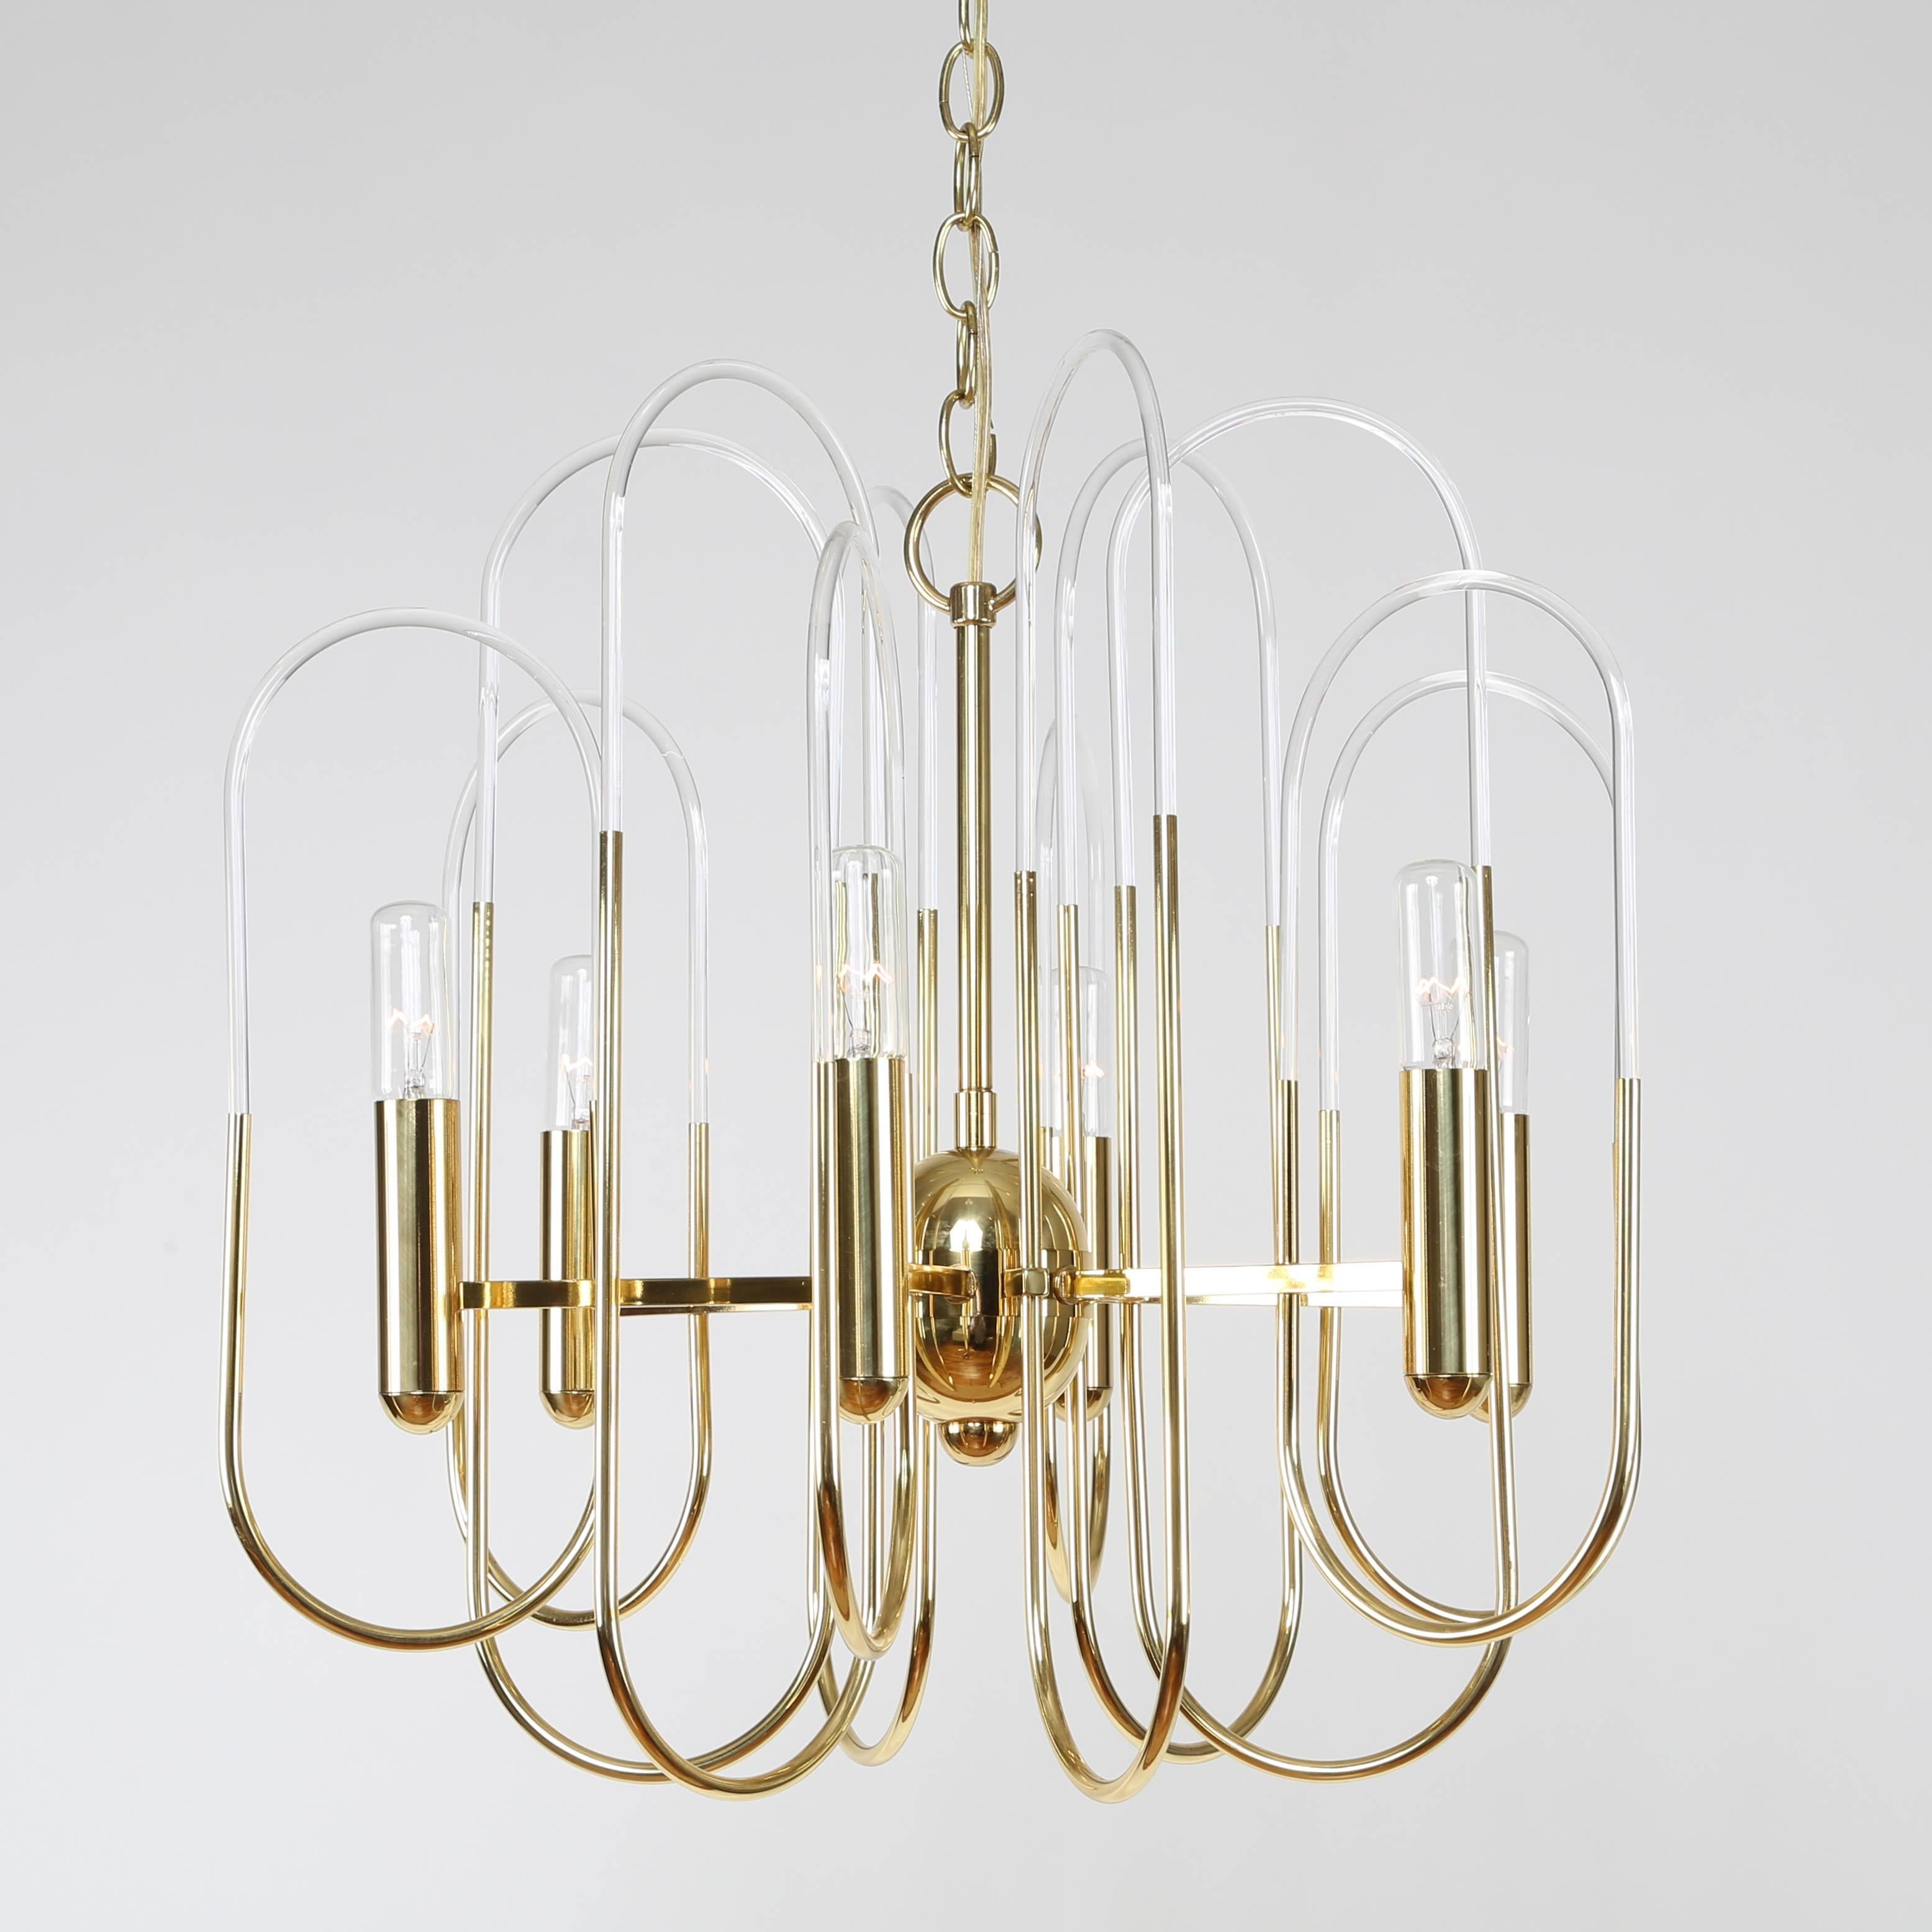 Gorgeous Enrico Profili chandelier from his 